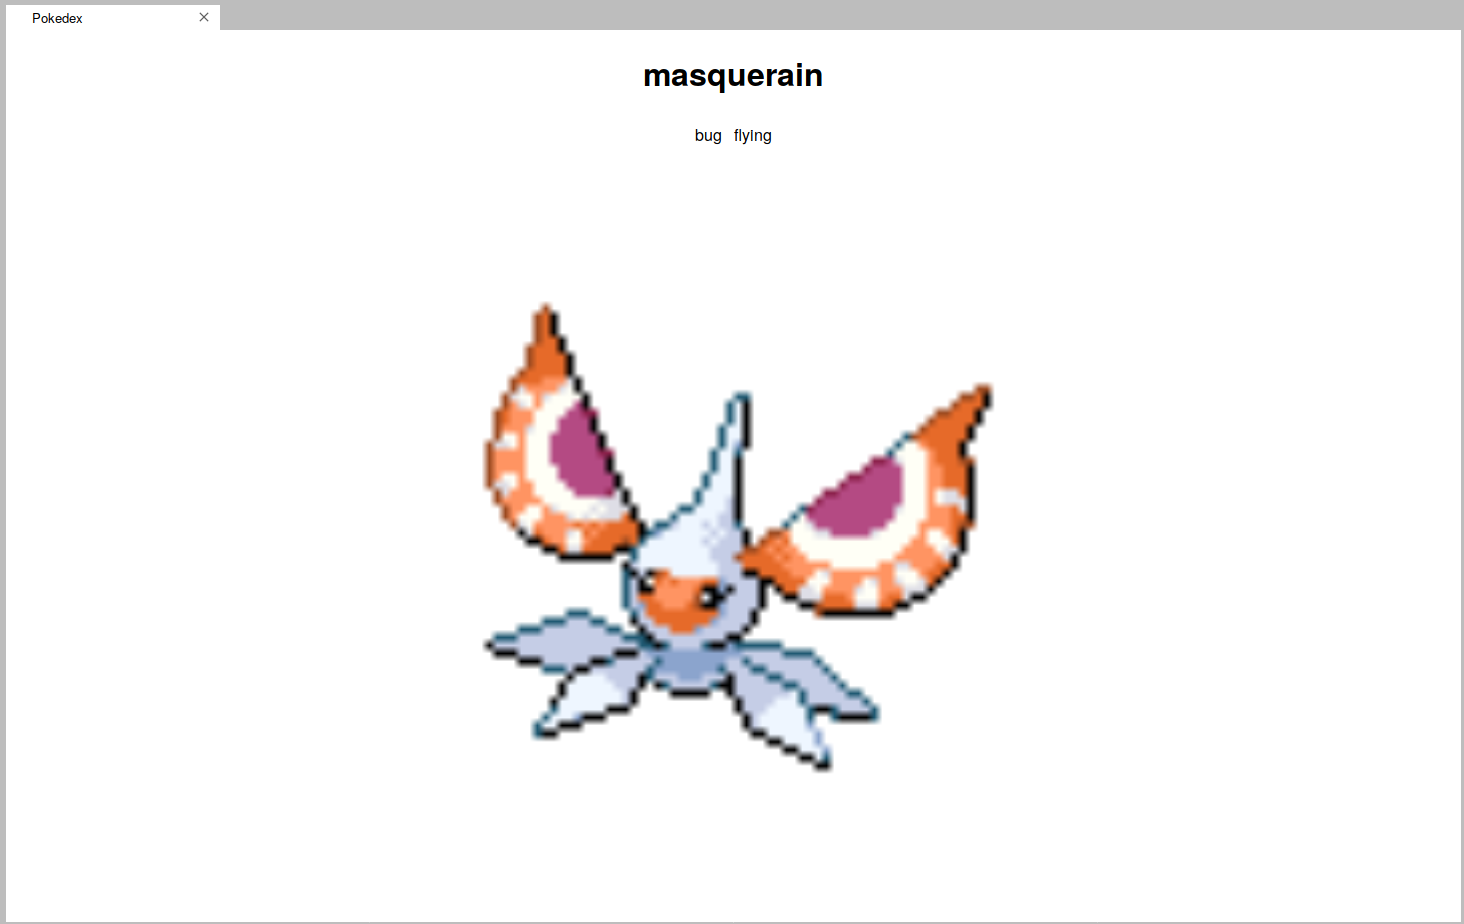 Demo image showing the pokedex entry of Masquerain